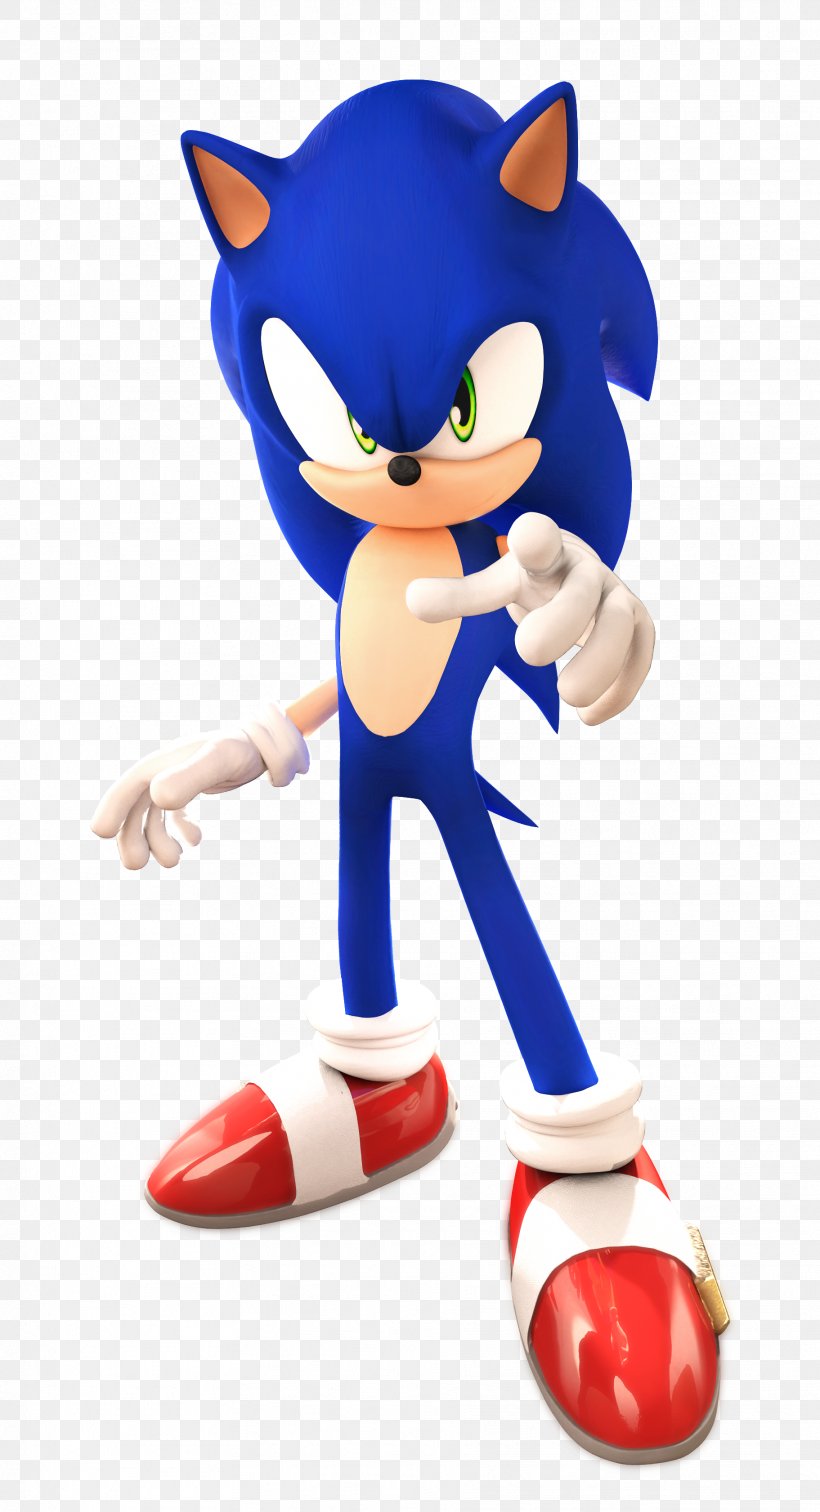 Sonic The Hedgehog 4: Episode II Sonic The Hedgehog 2 Sonic Adventure Sonic Riders, PNG, 1823x3362px, Sonic The Hedgehog, Action Figure, E123 Omega, Fictional Character, Figurine Download Free